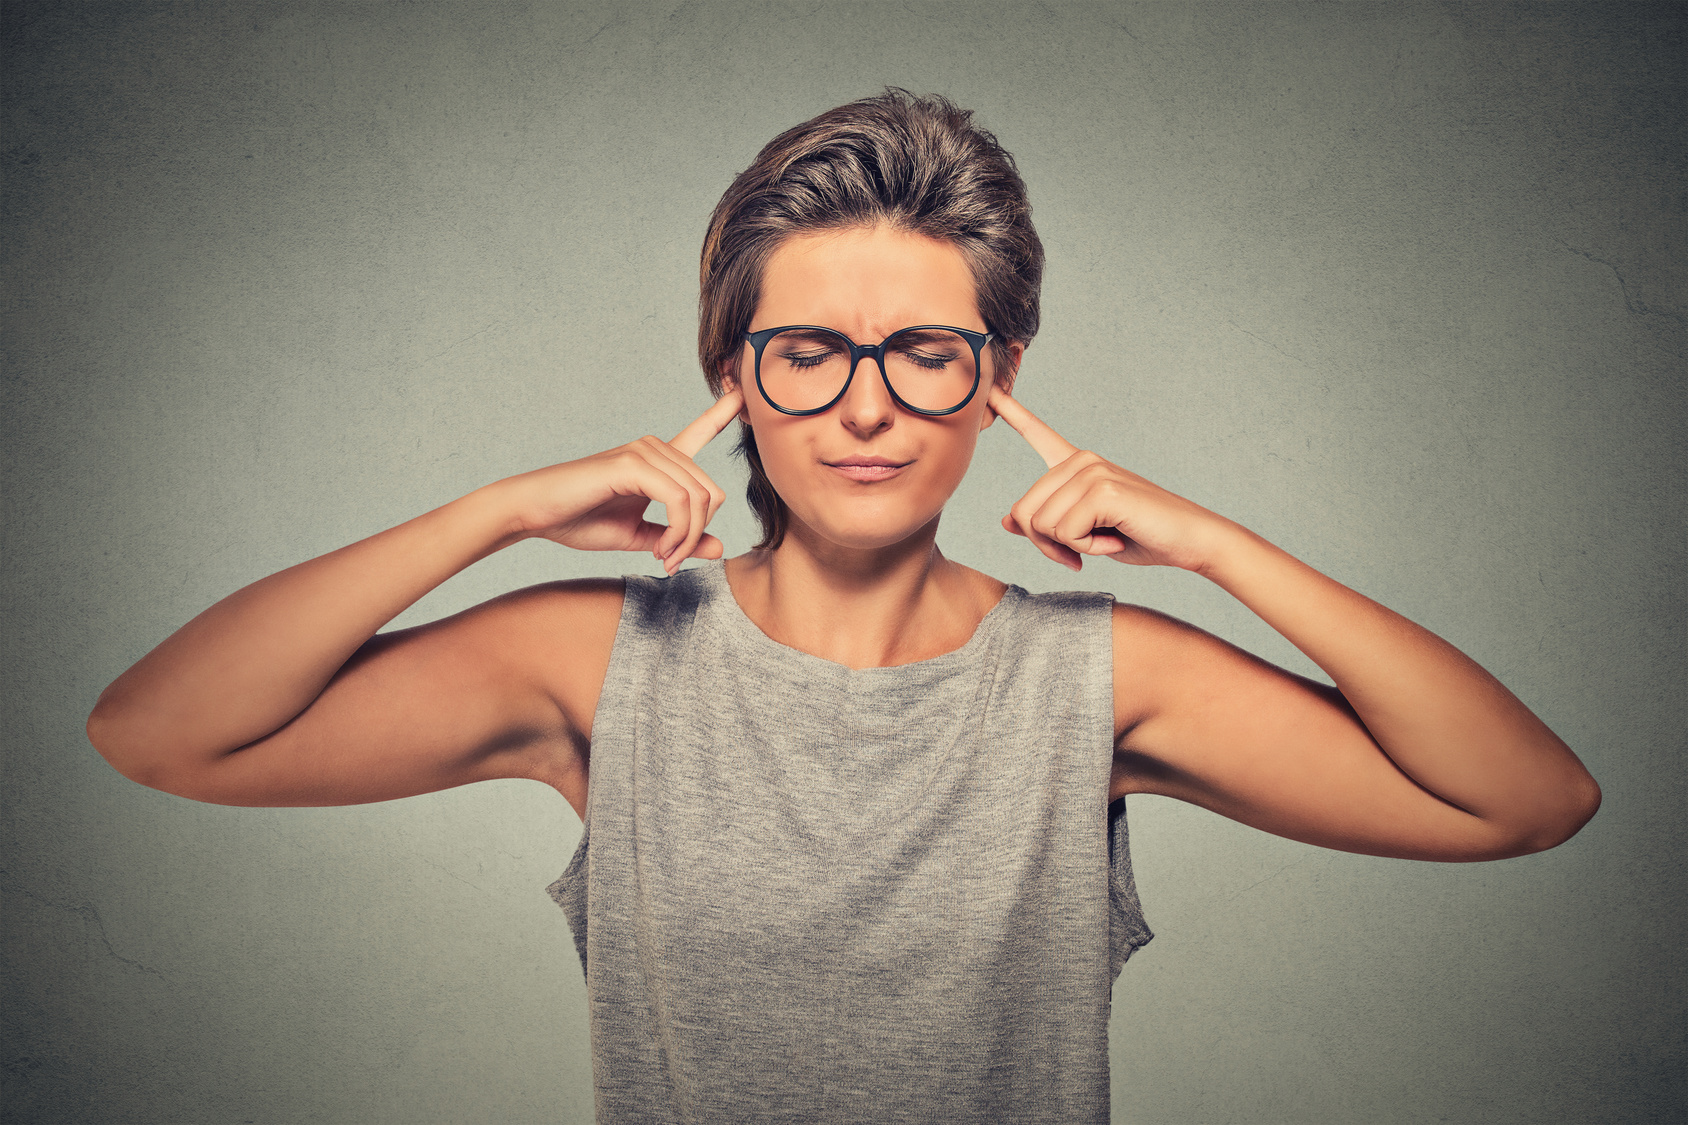 plugging ears with fingers doesn’t want to listen woman hear upset